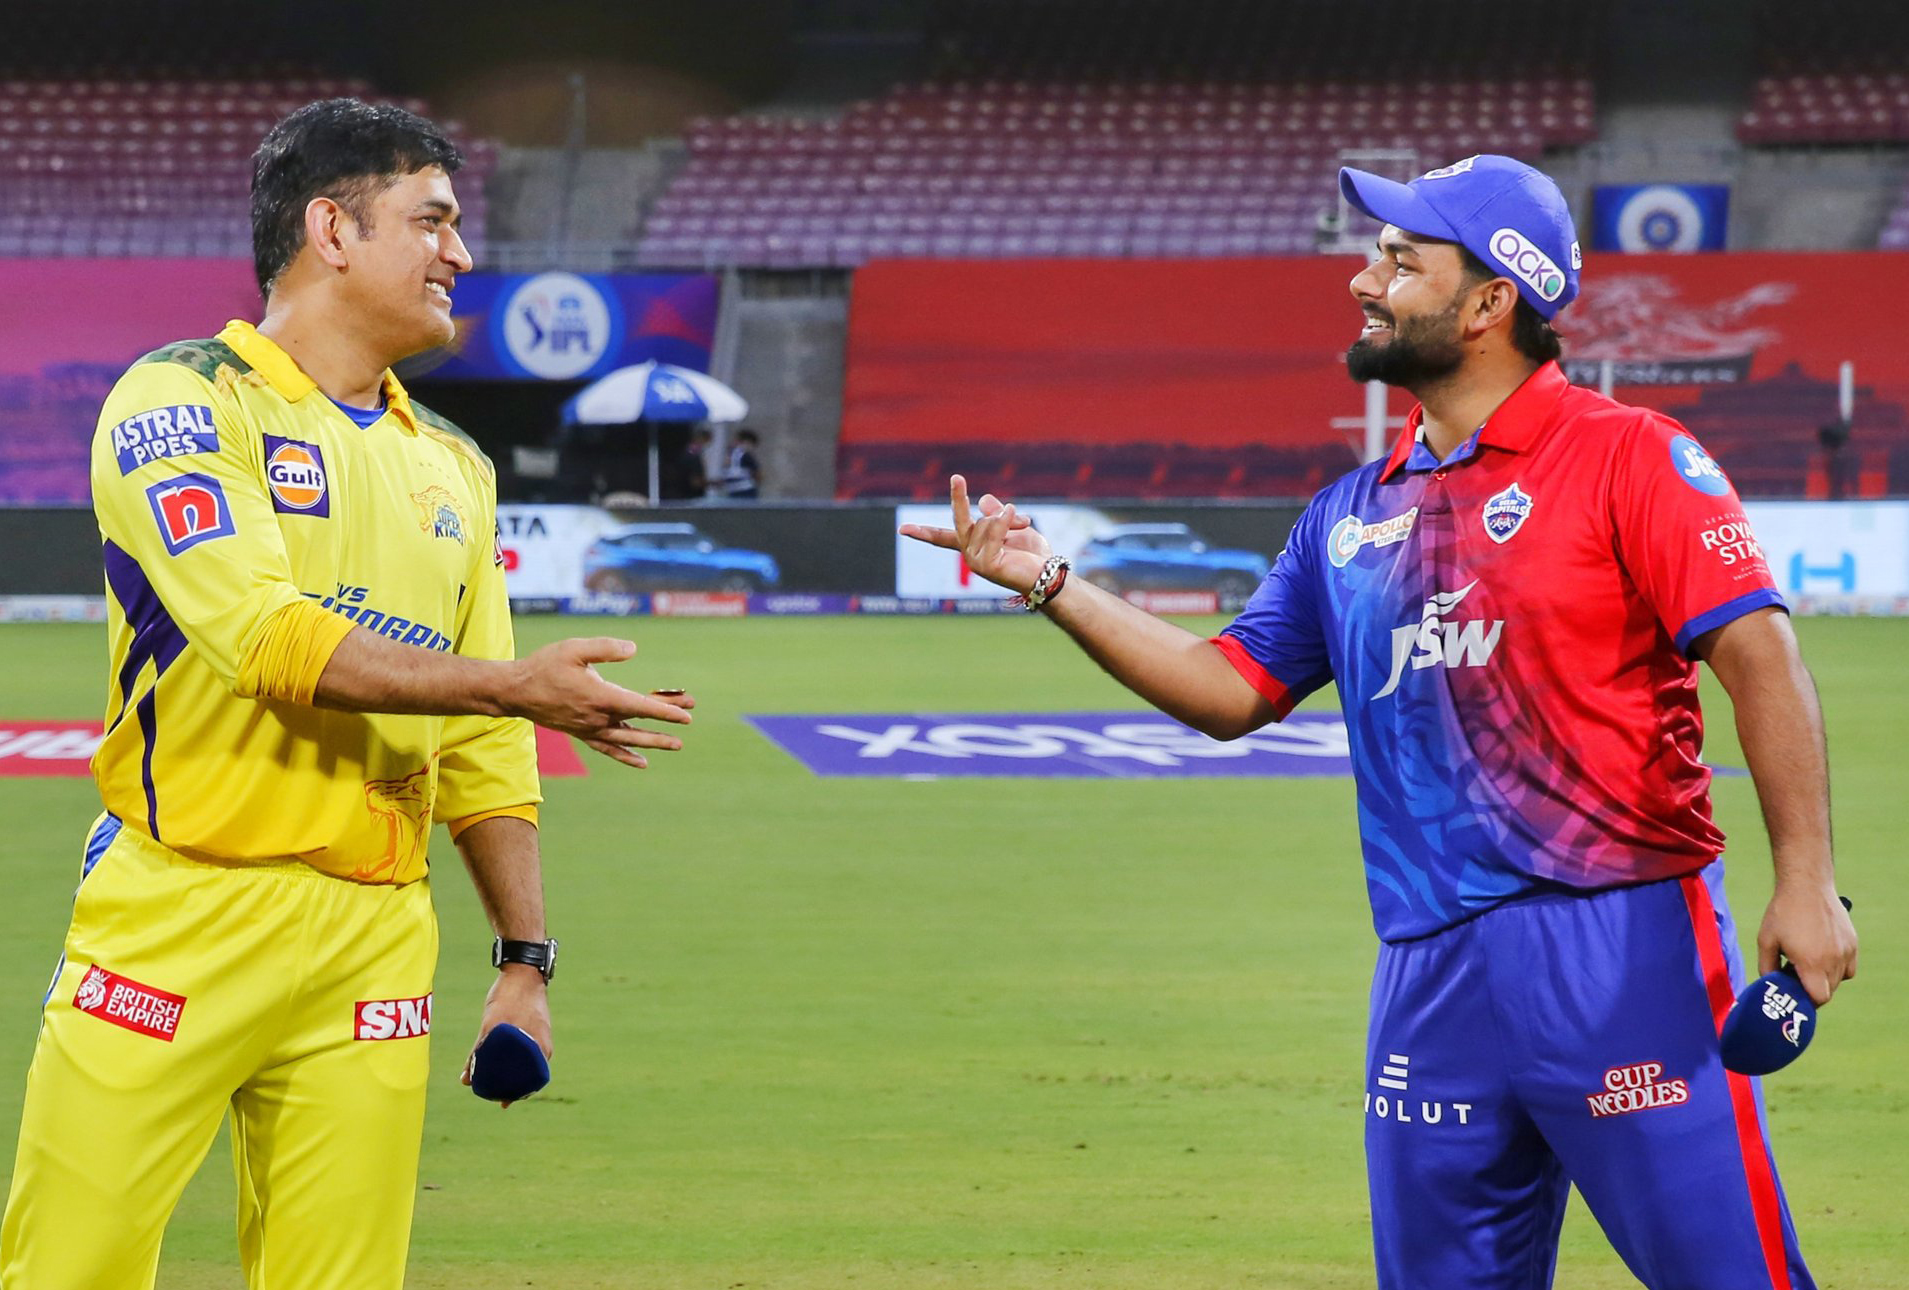 Virat feels helpless, Jadeja leaves CSK camp but the younger lot are upbeat